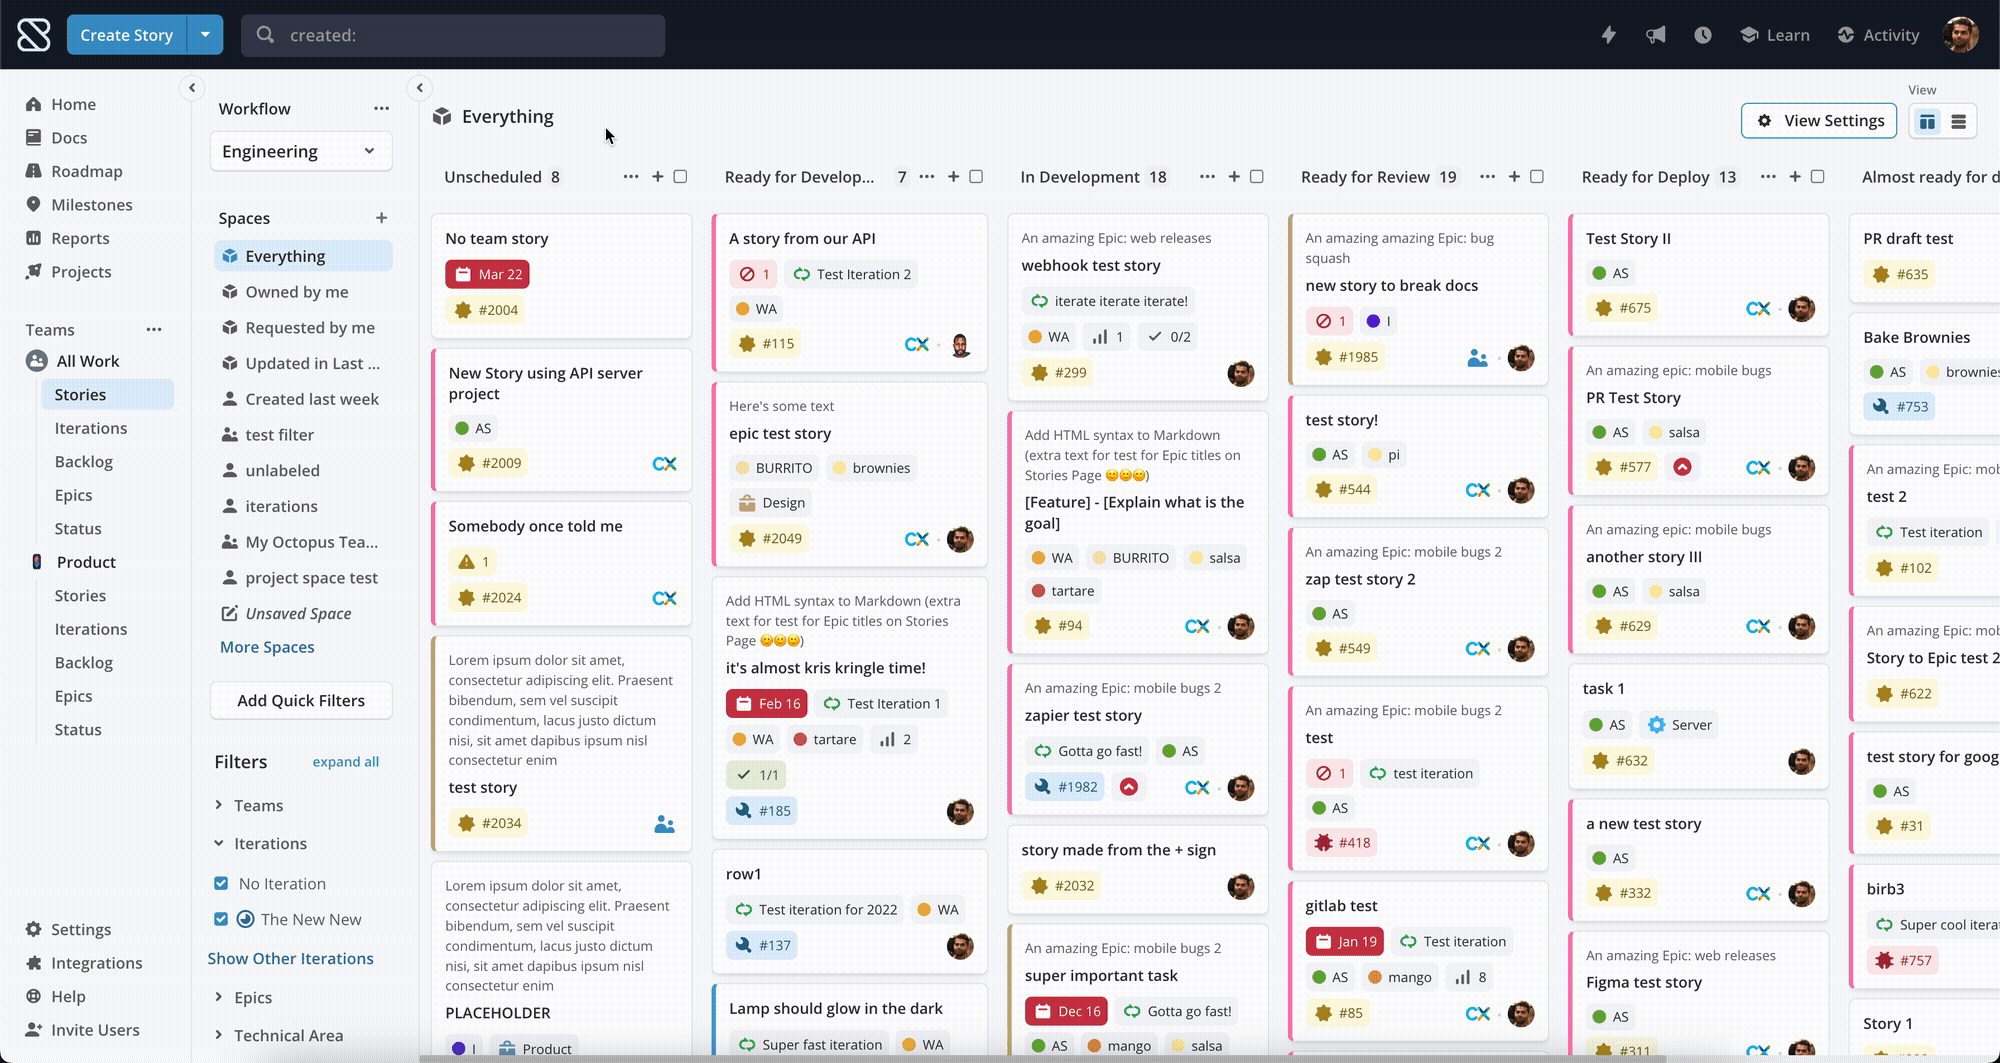 The Reports Page